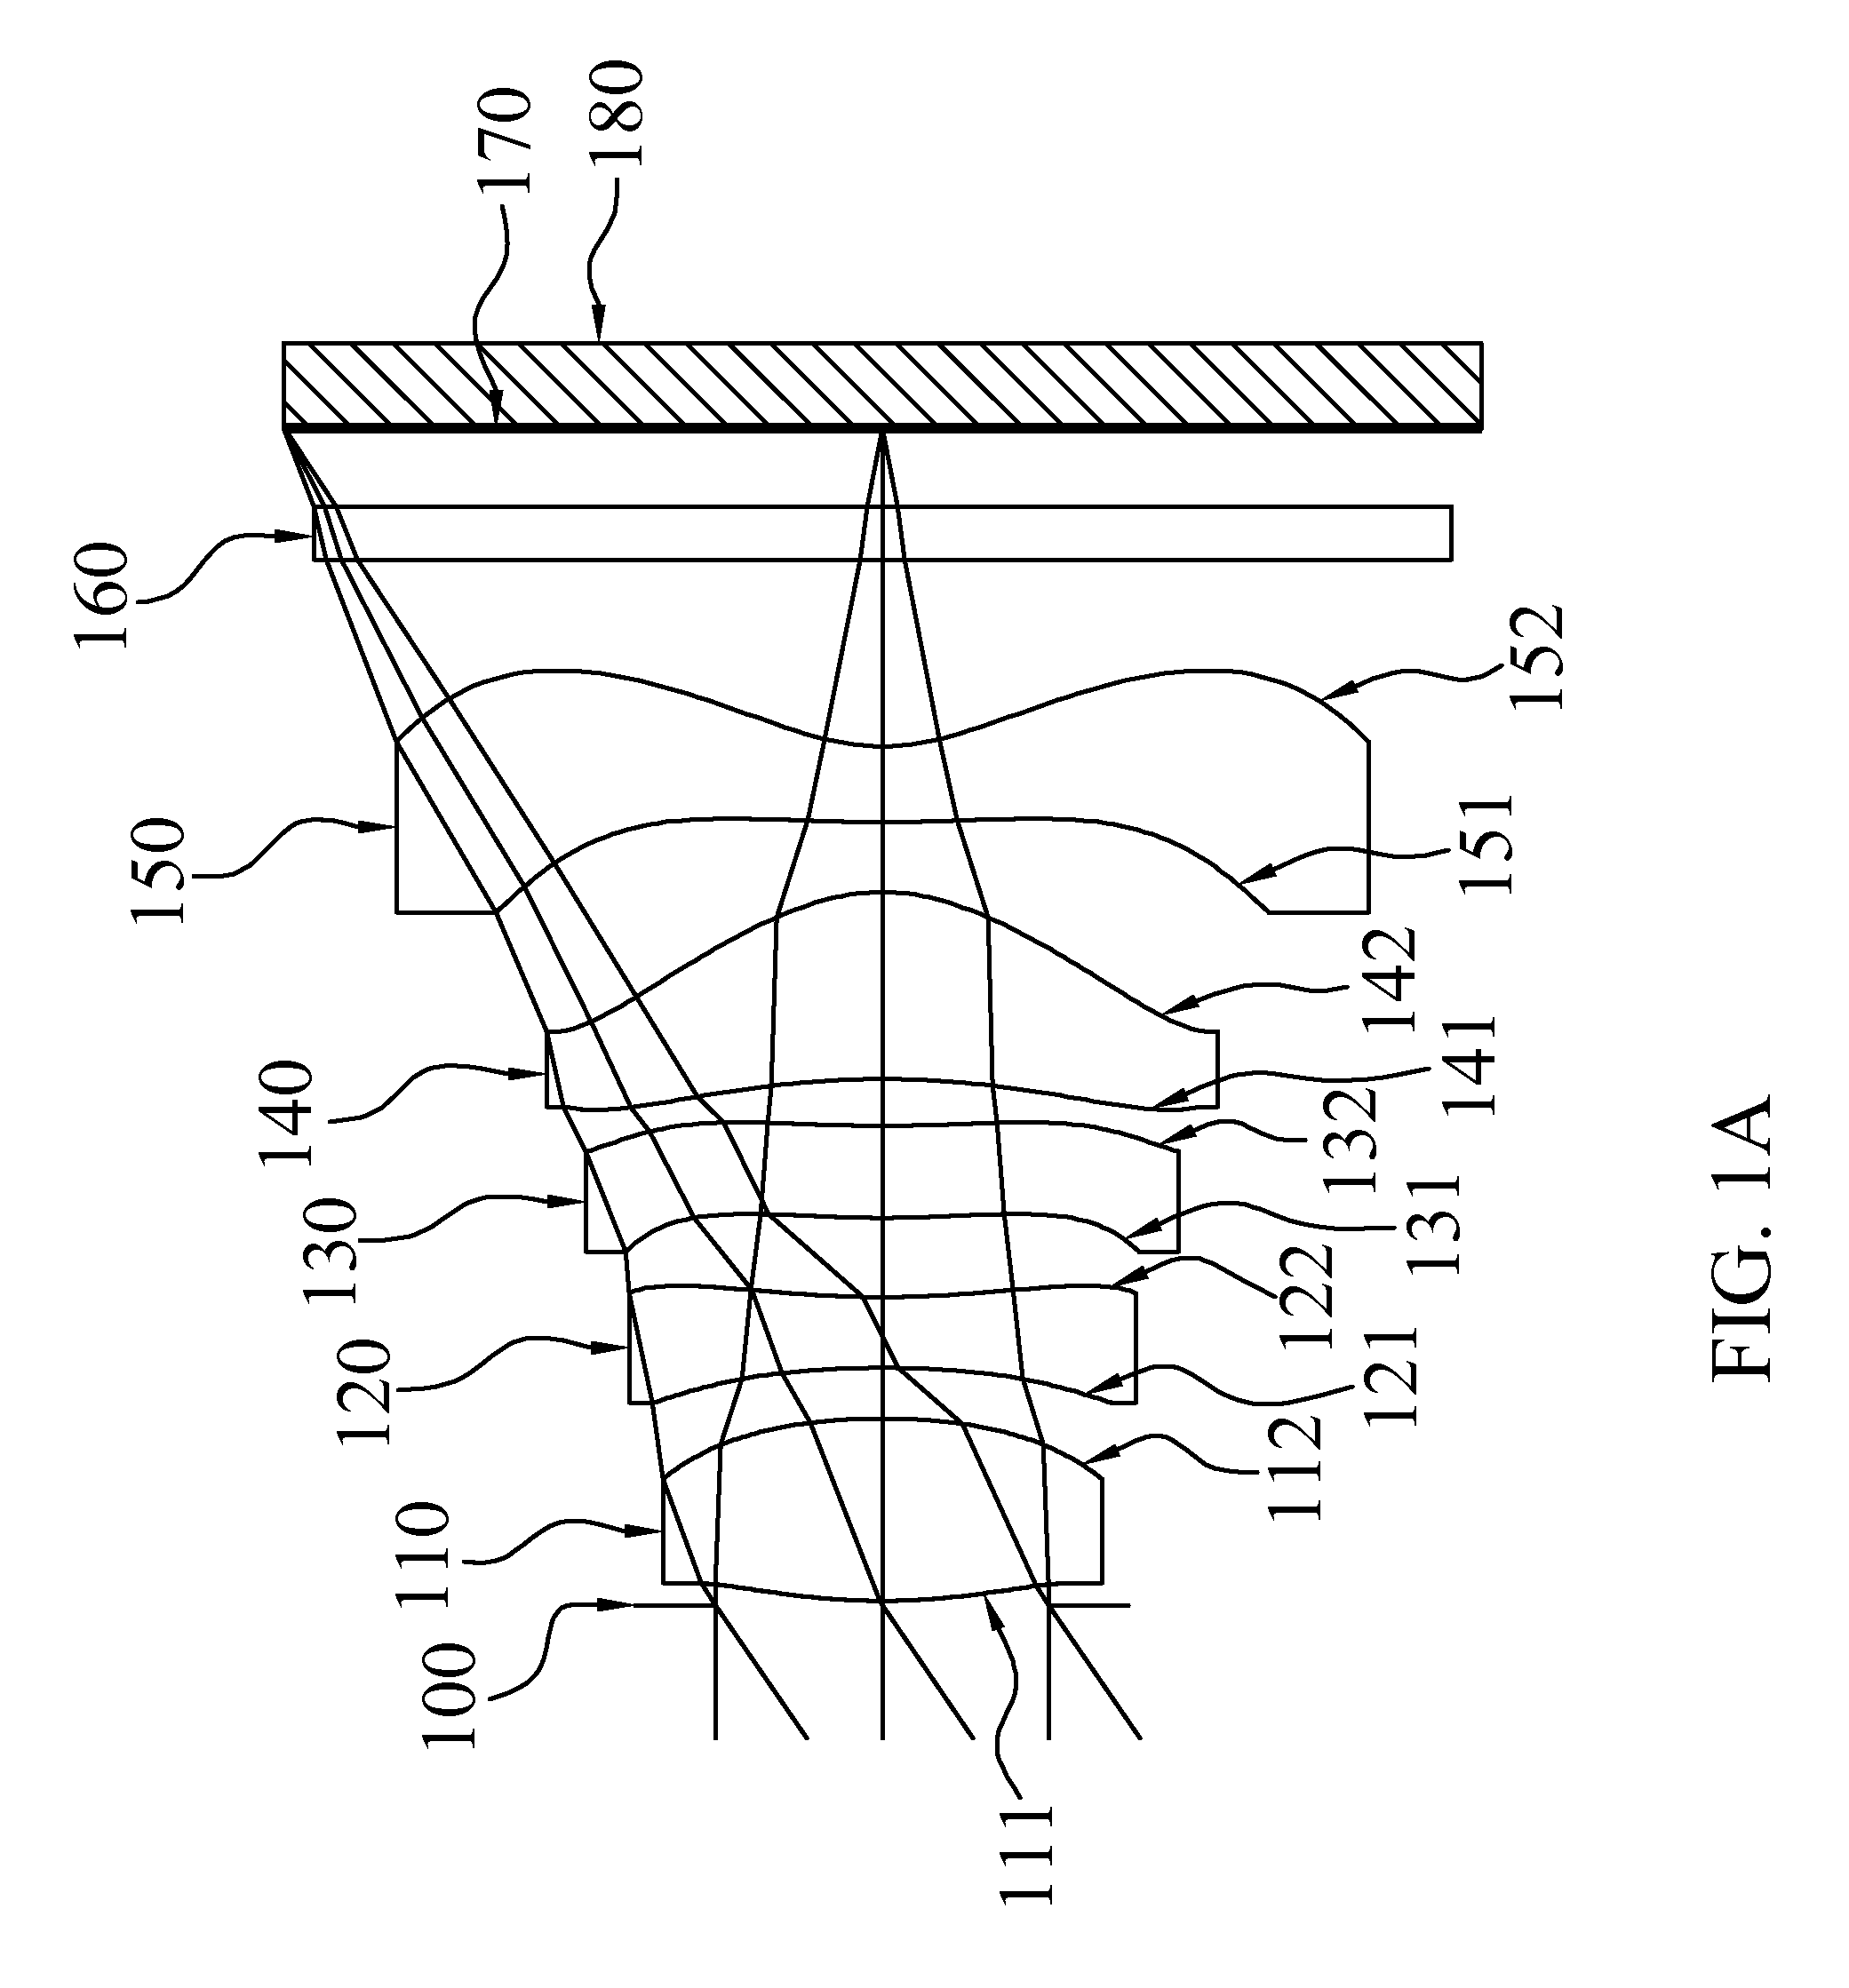 Optical System for Imaging Pickup